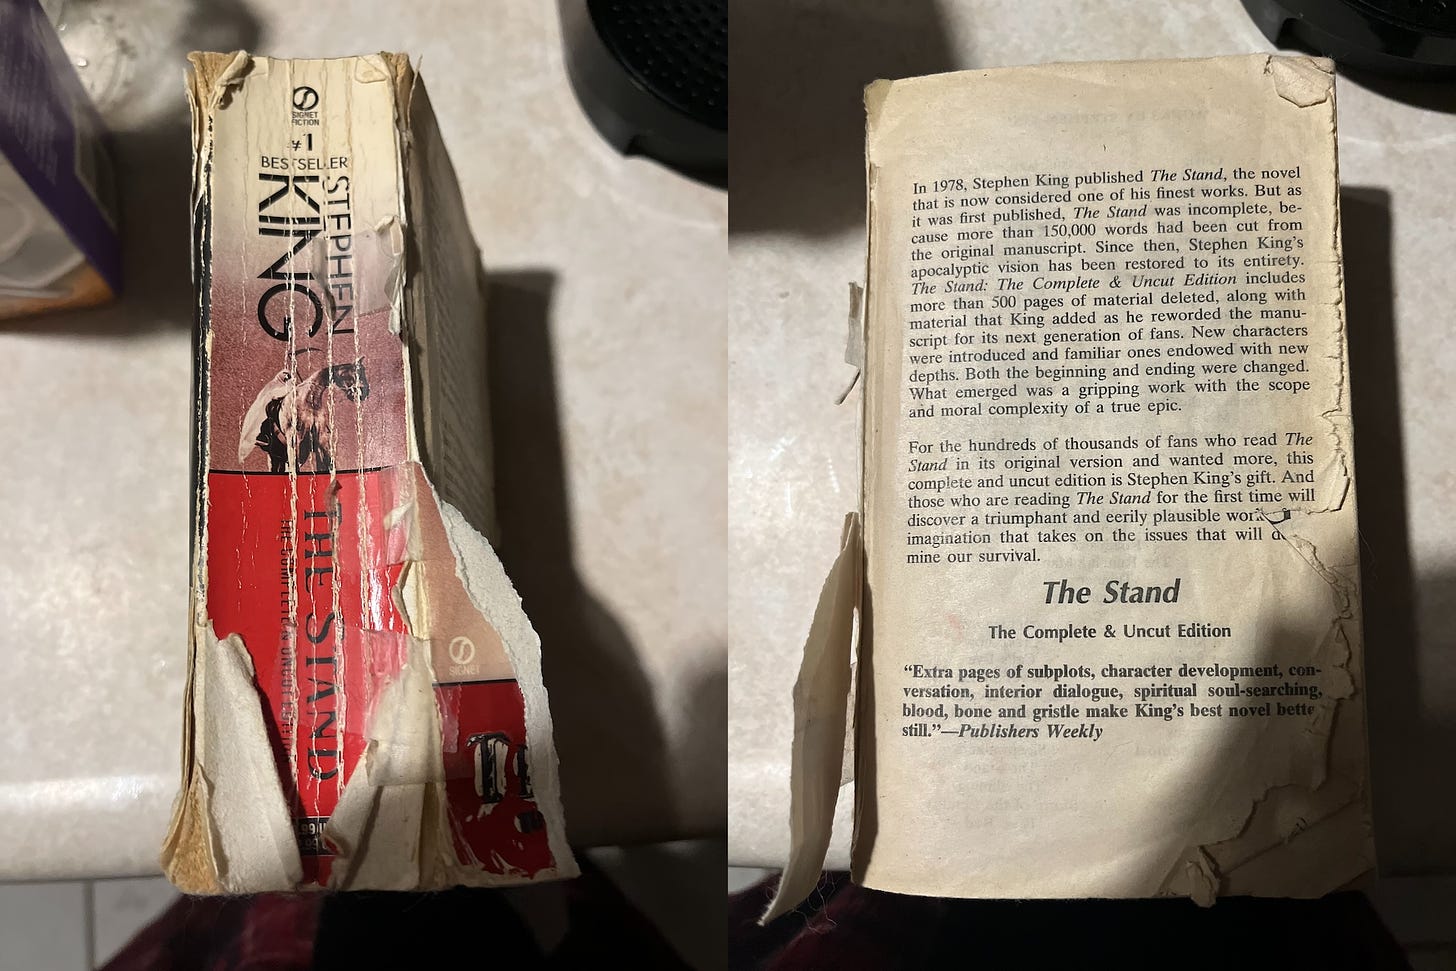 My younger sister's copy of The Stand. She's had this book for nearly 20 years, and has probably read it at least as many times.